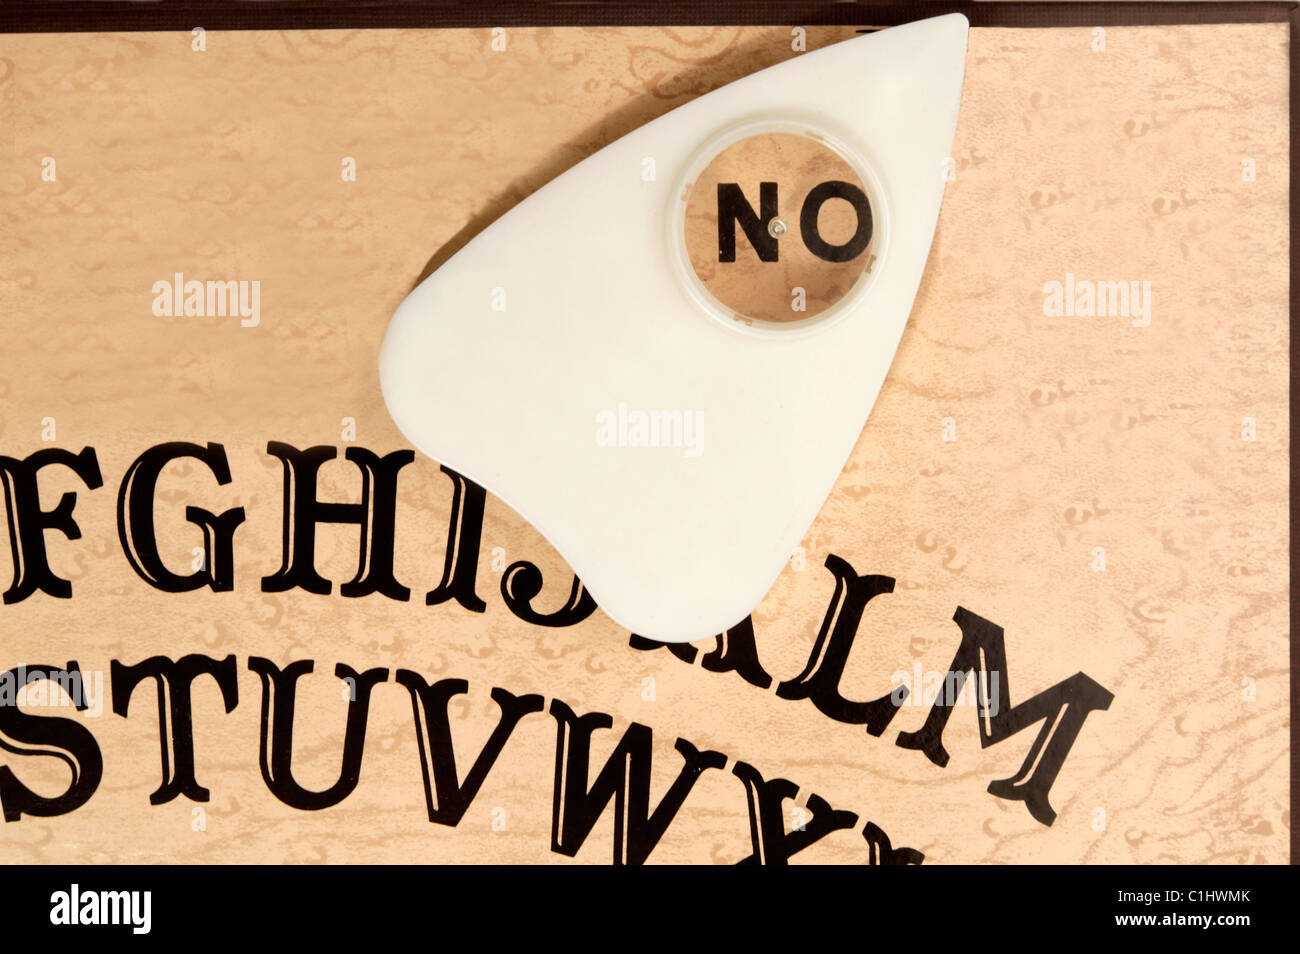 Ouija board with the planchette pointing to NO Stock Photo